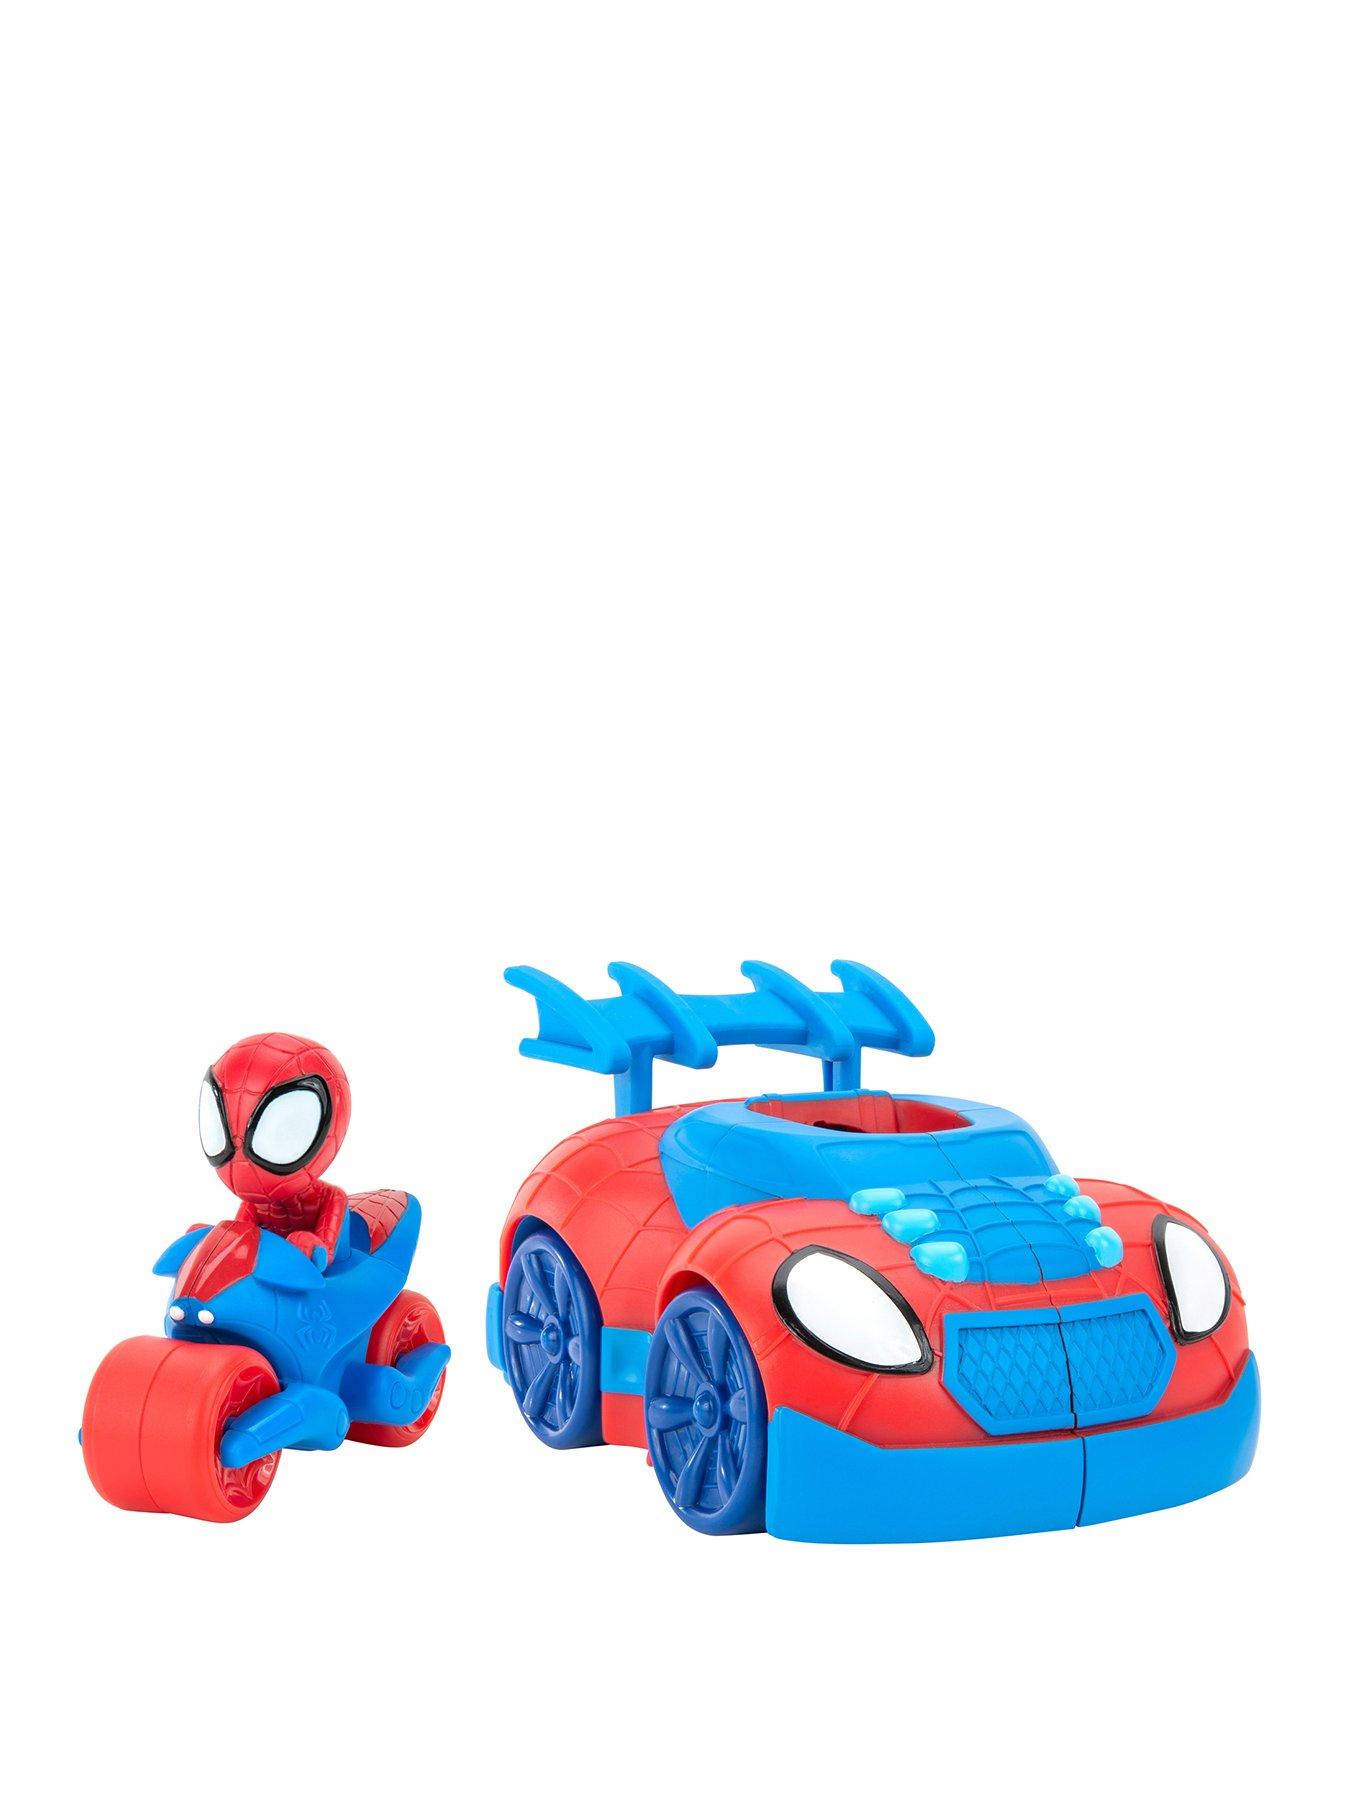 EXCLUSIVE: Electro, New Vehicles Join Hasbro's Spidey and His Amazing  Friends Line